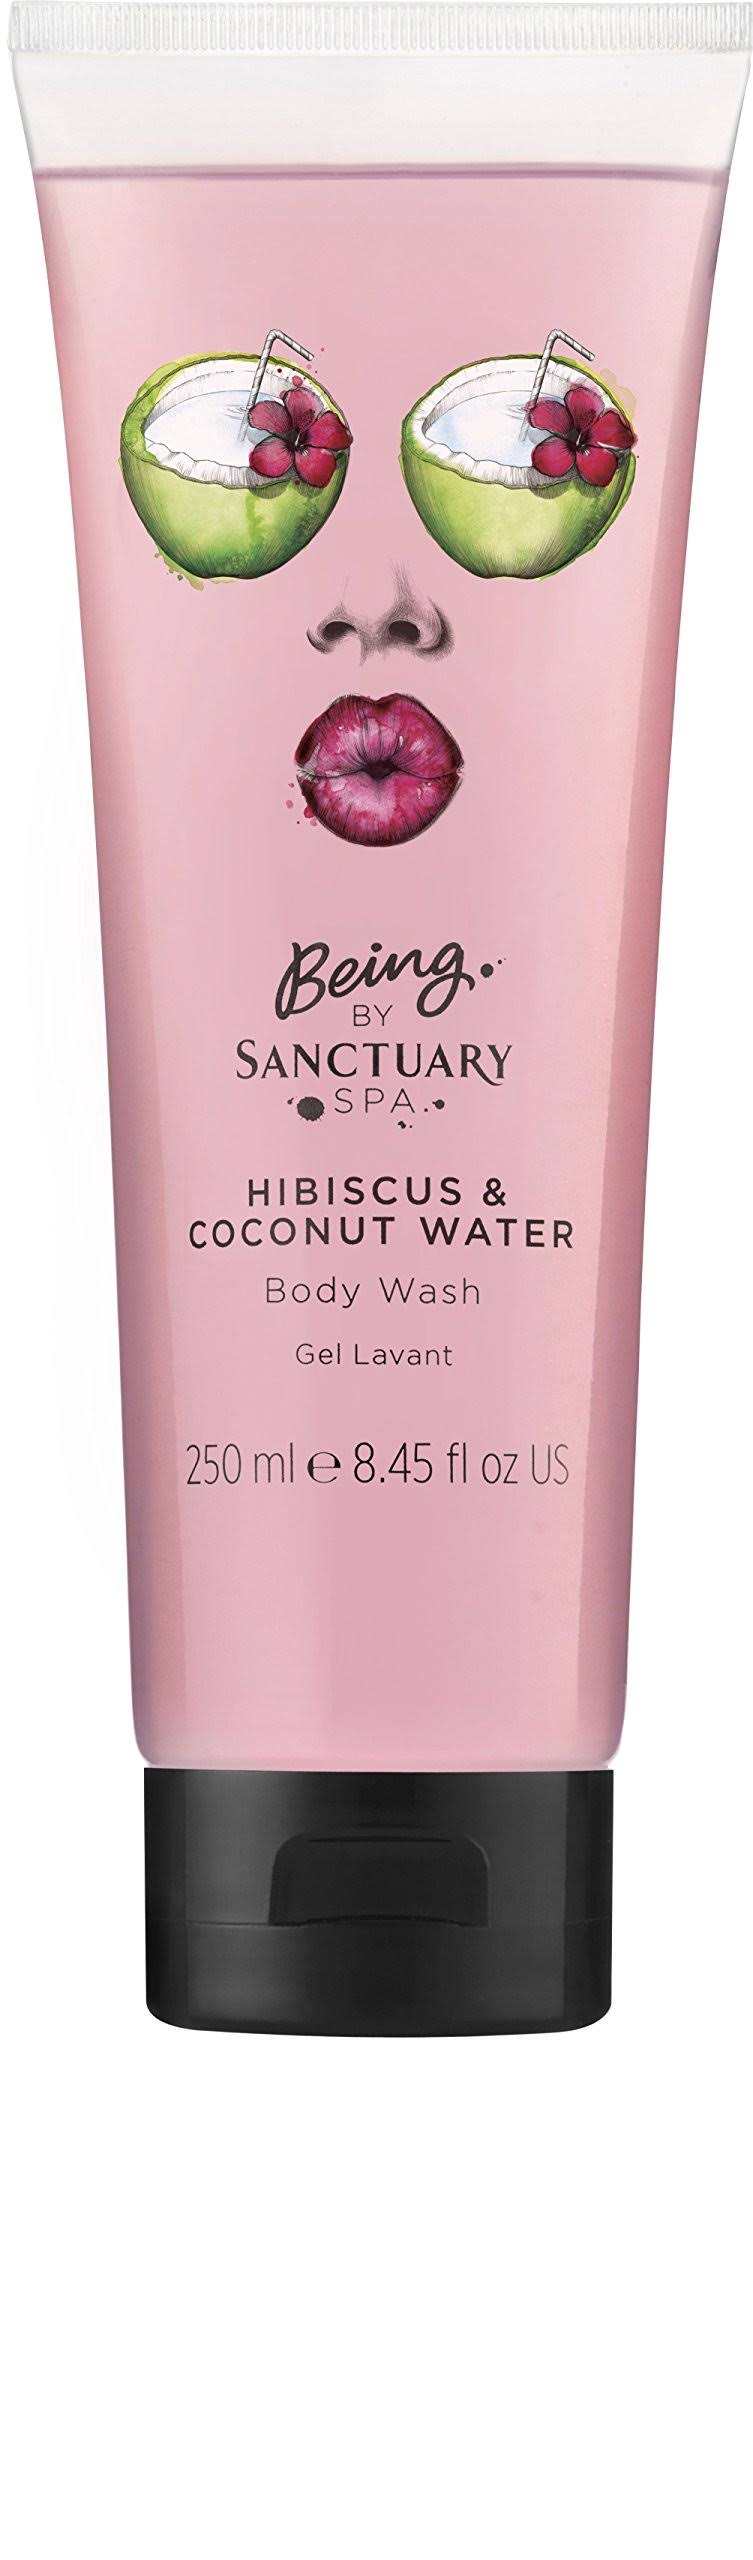 Being by Sanctuary Spa Body Wash Hibiscus and Coconut Water 250ml